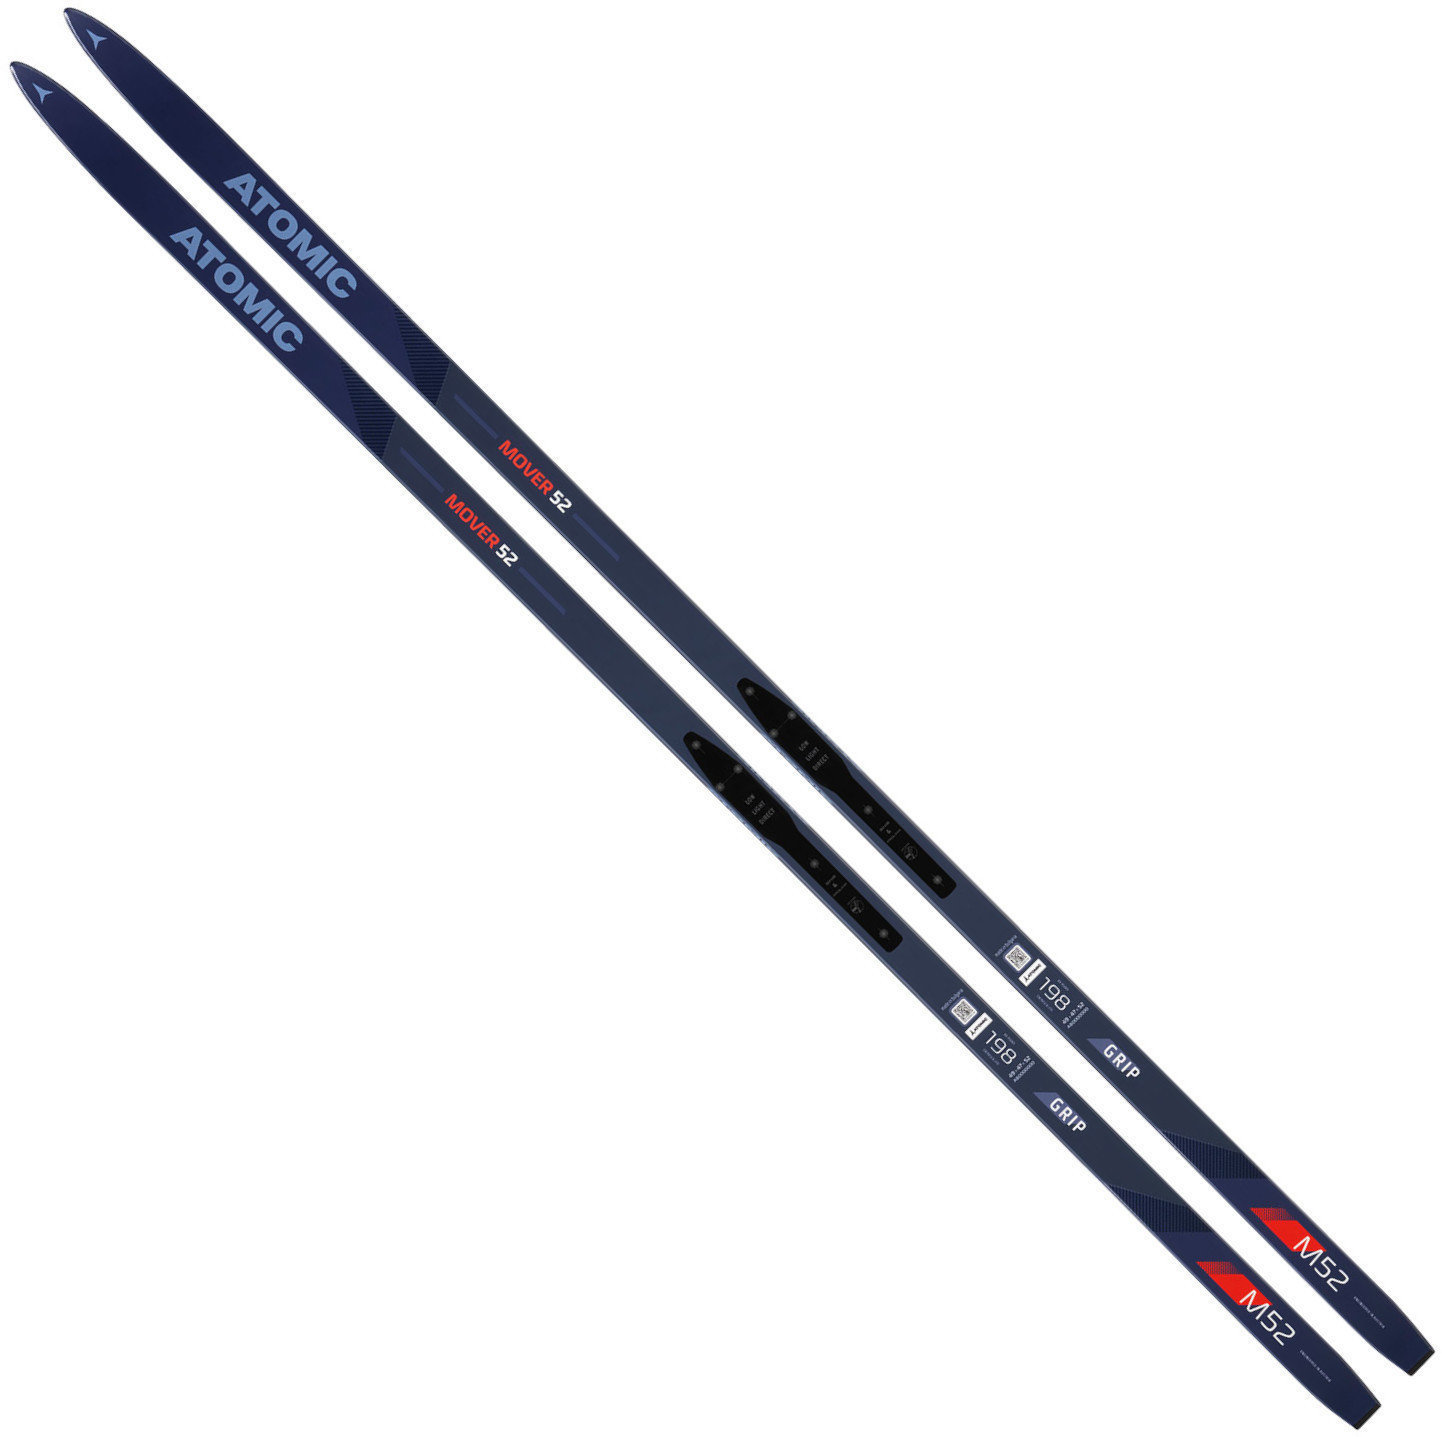 Cross-country skije Atomic Mover 52 Grip Blue/Light Blue/Red 191 cm 18/19